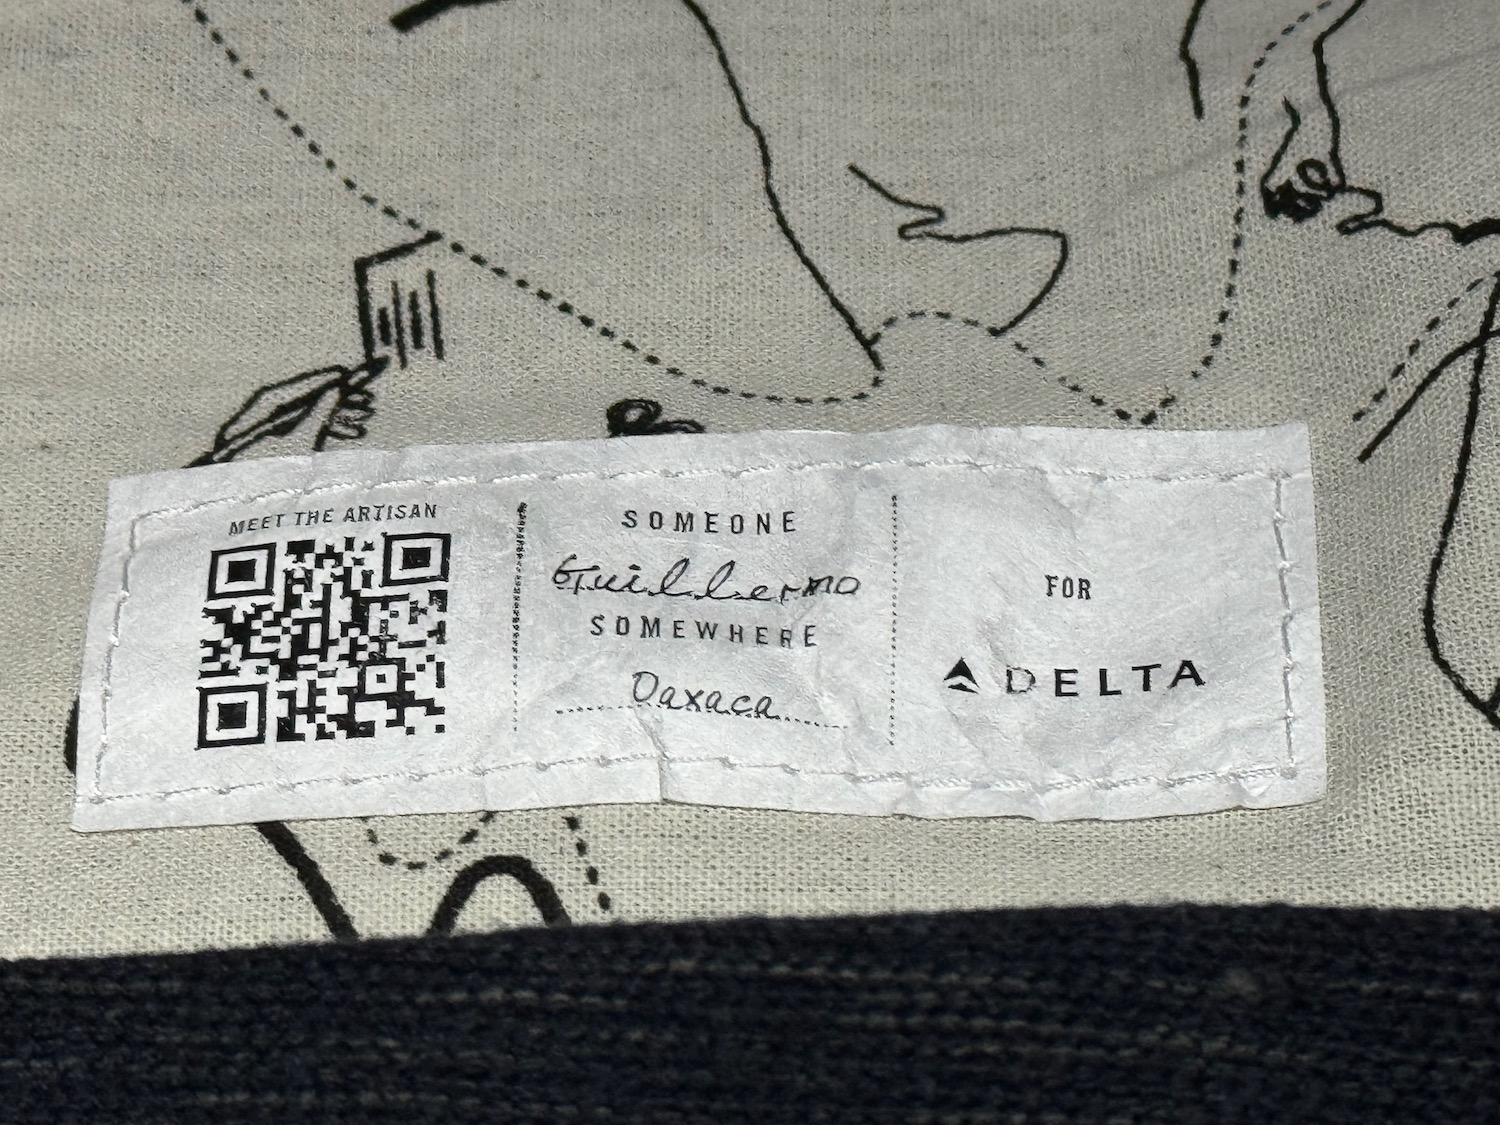 a white label with a qr code on it